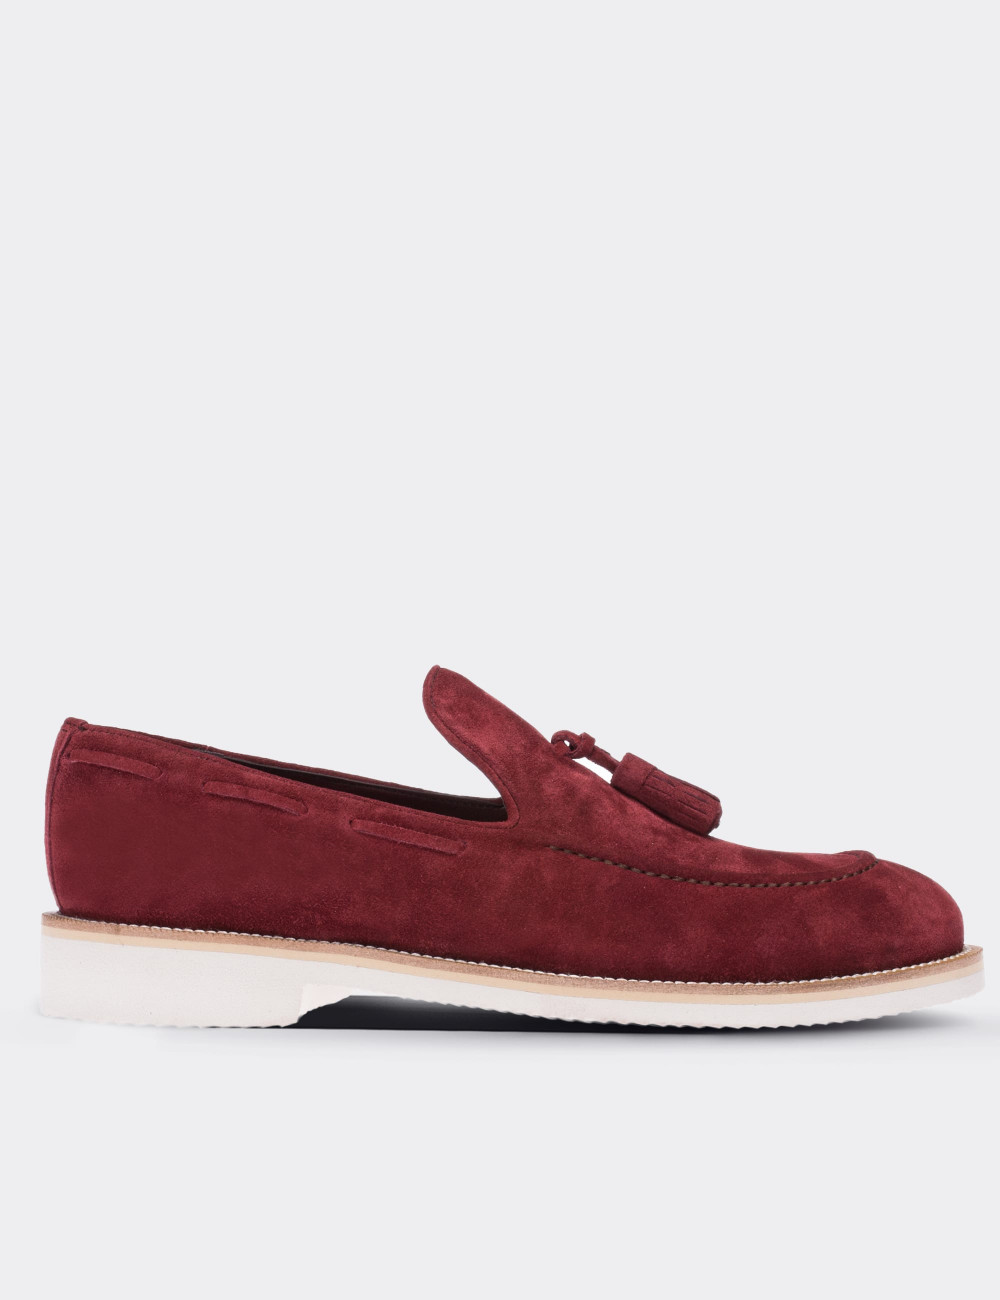 Burgundy Suede Leather Loafers - 01319MBRDE02